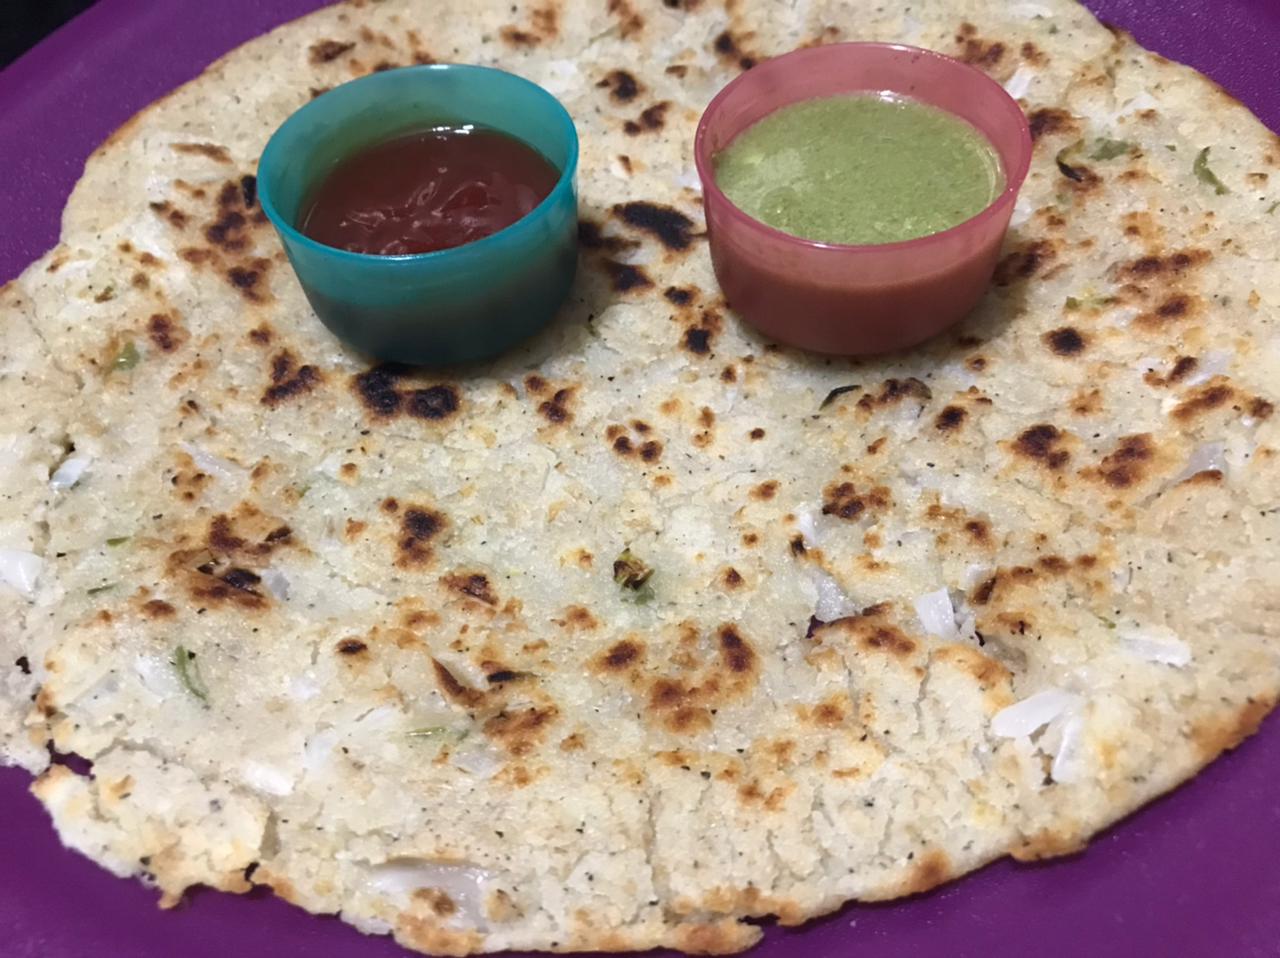 oats chilla served with chutney and ketchup